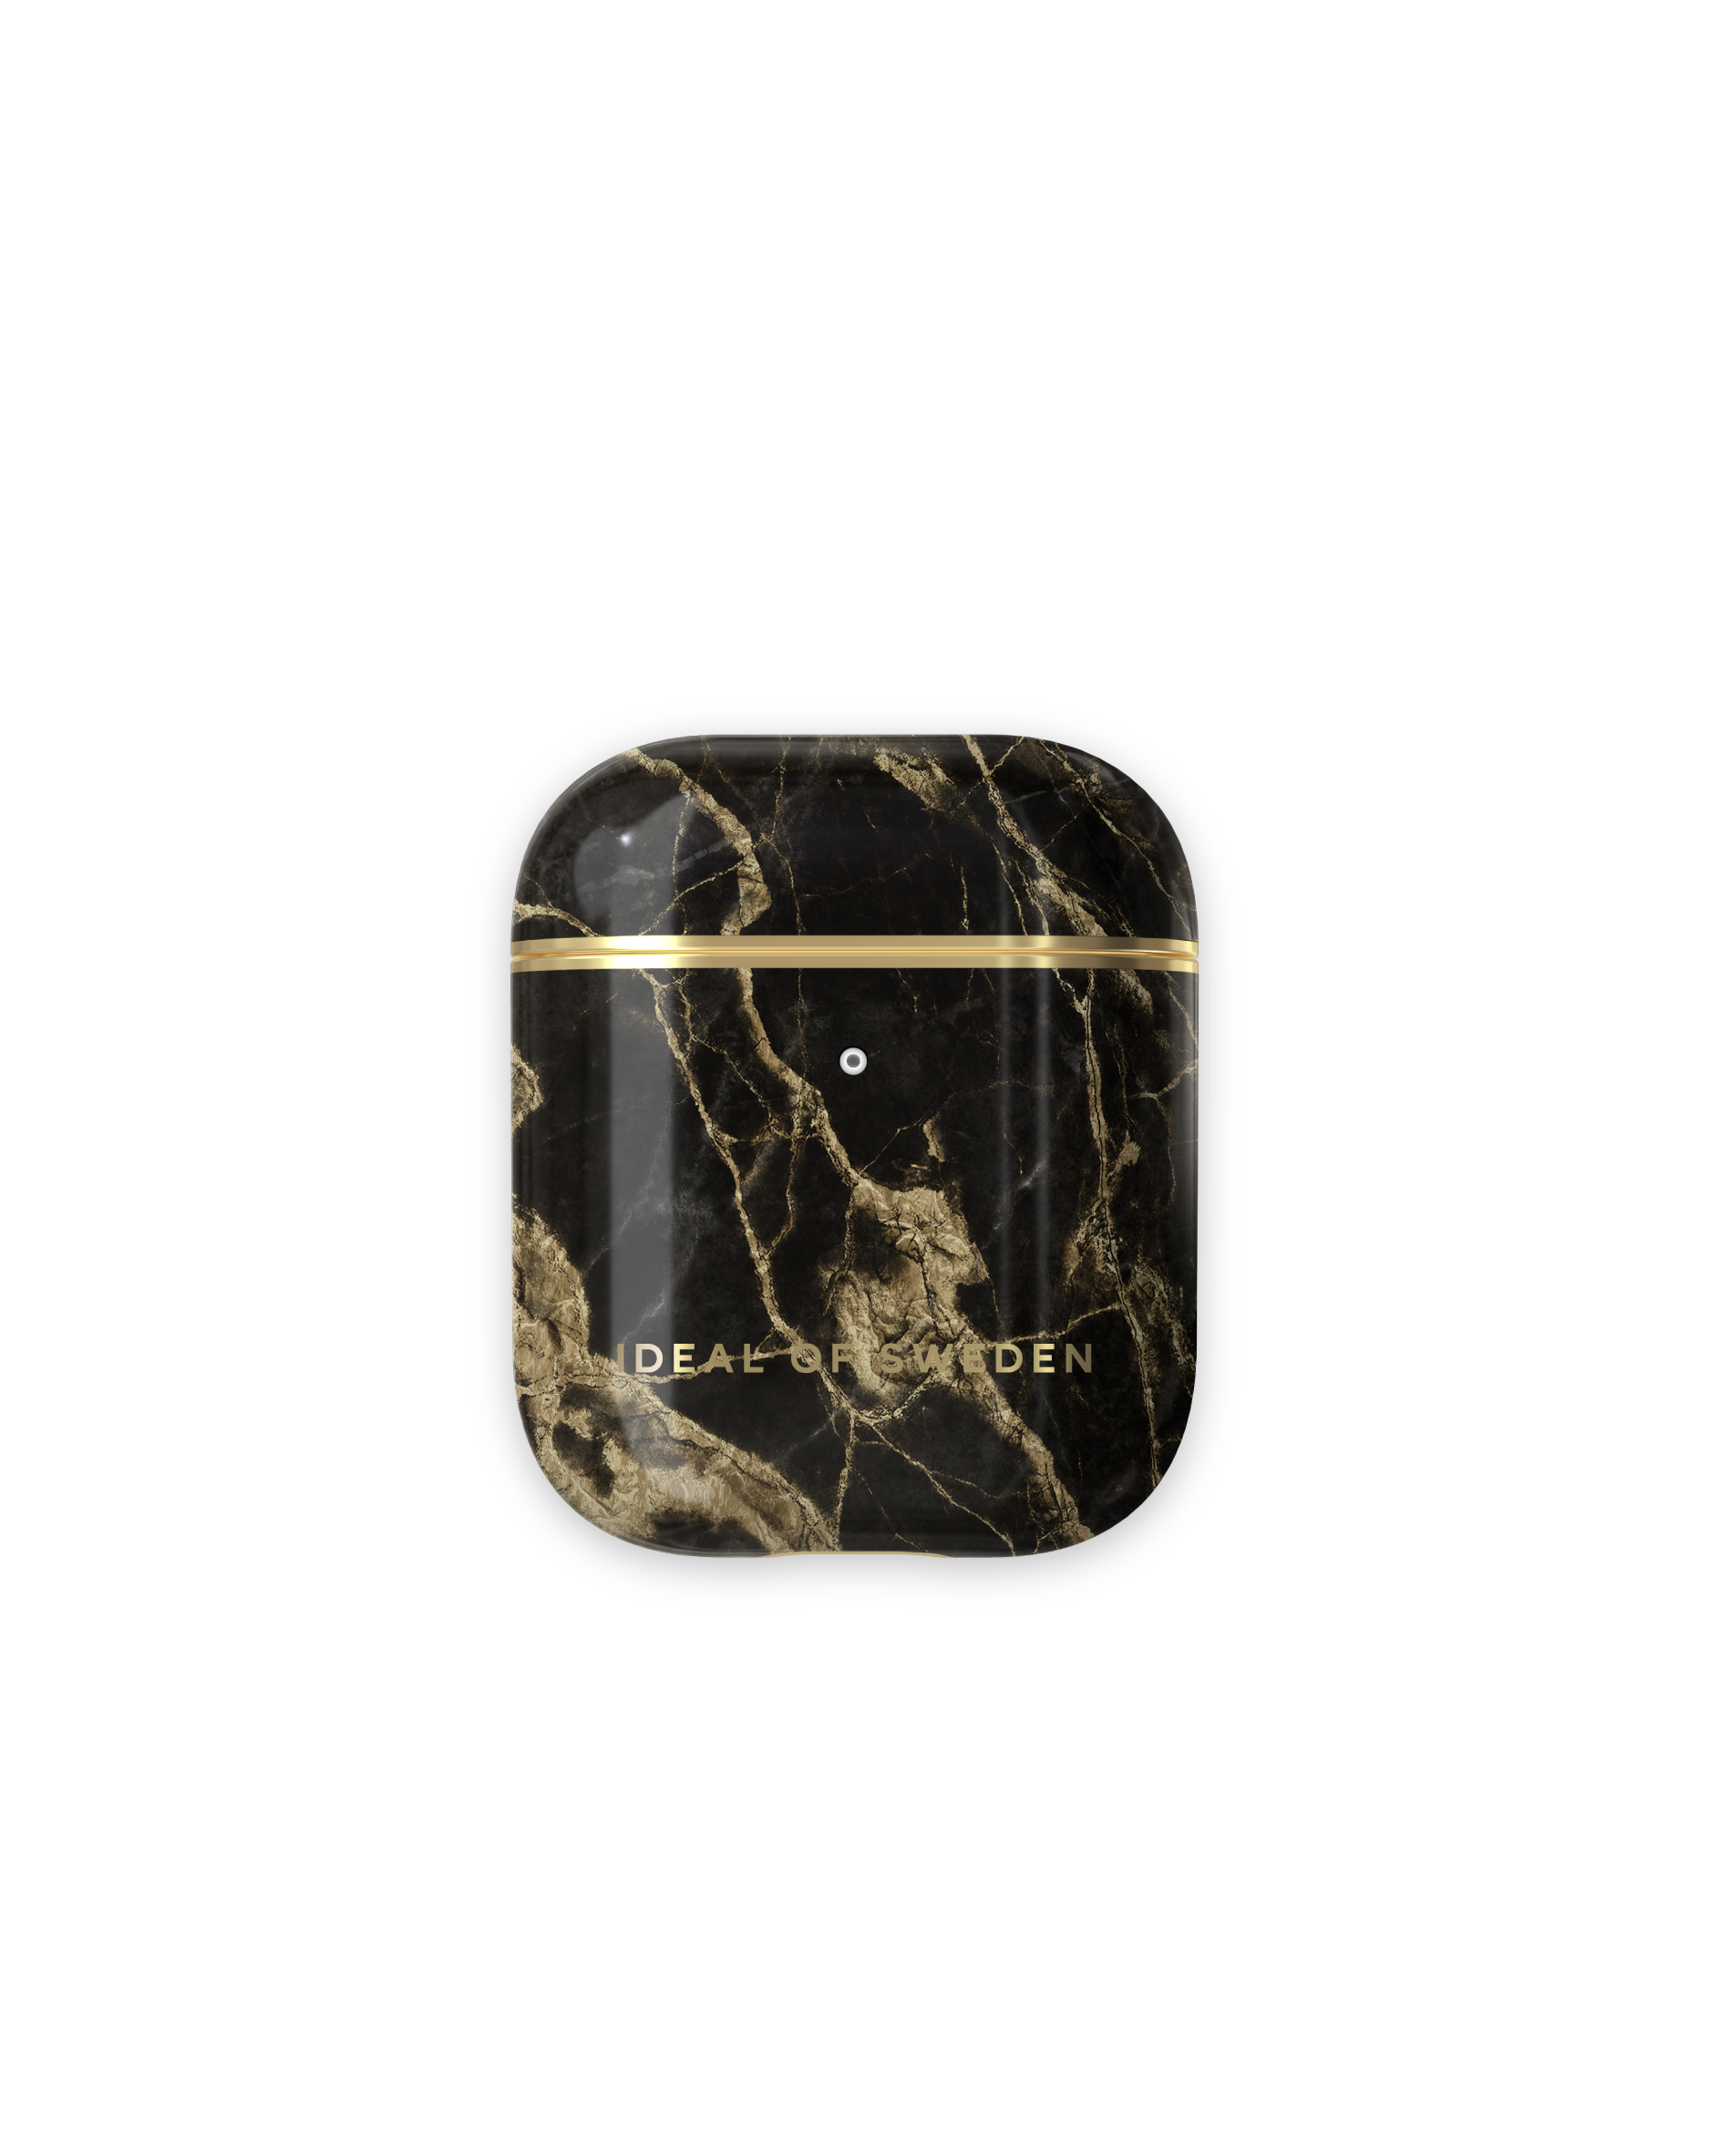 IDEAL OF für: Marble AirPod Full passend Apple Case IDFAPC-191 Cover Smoke SWEDEN Golden